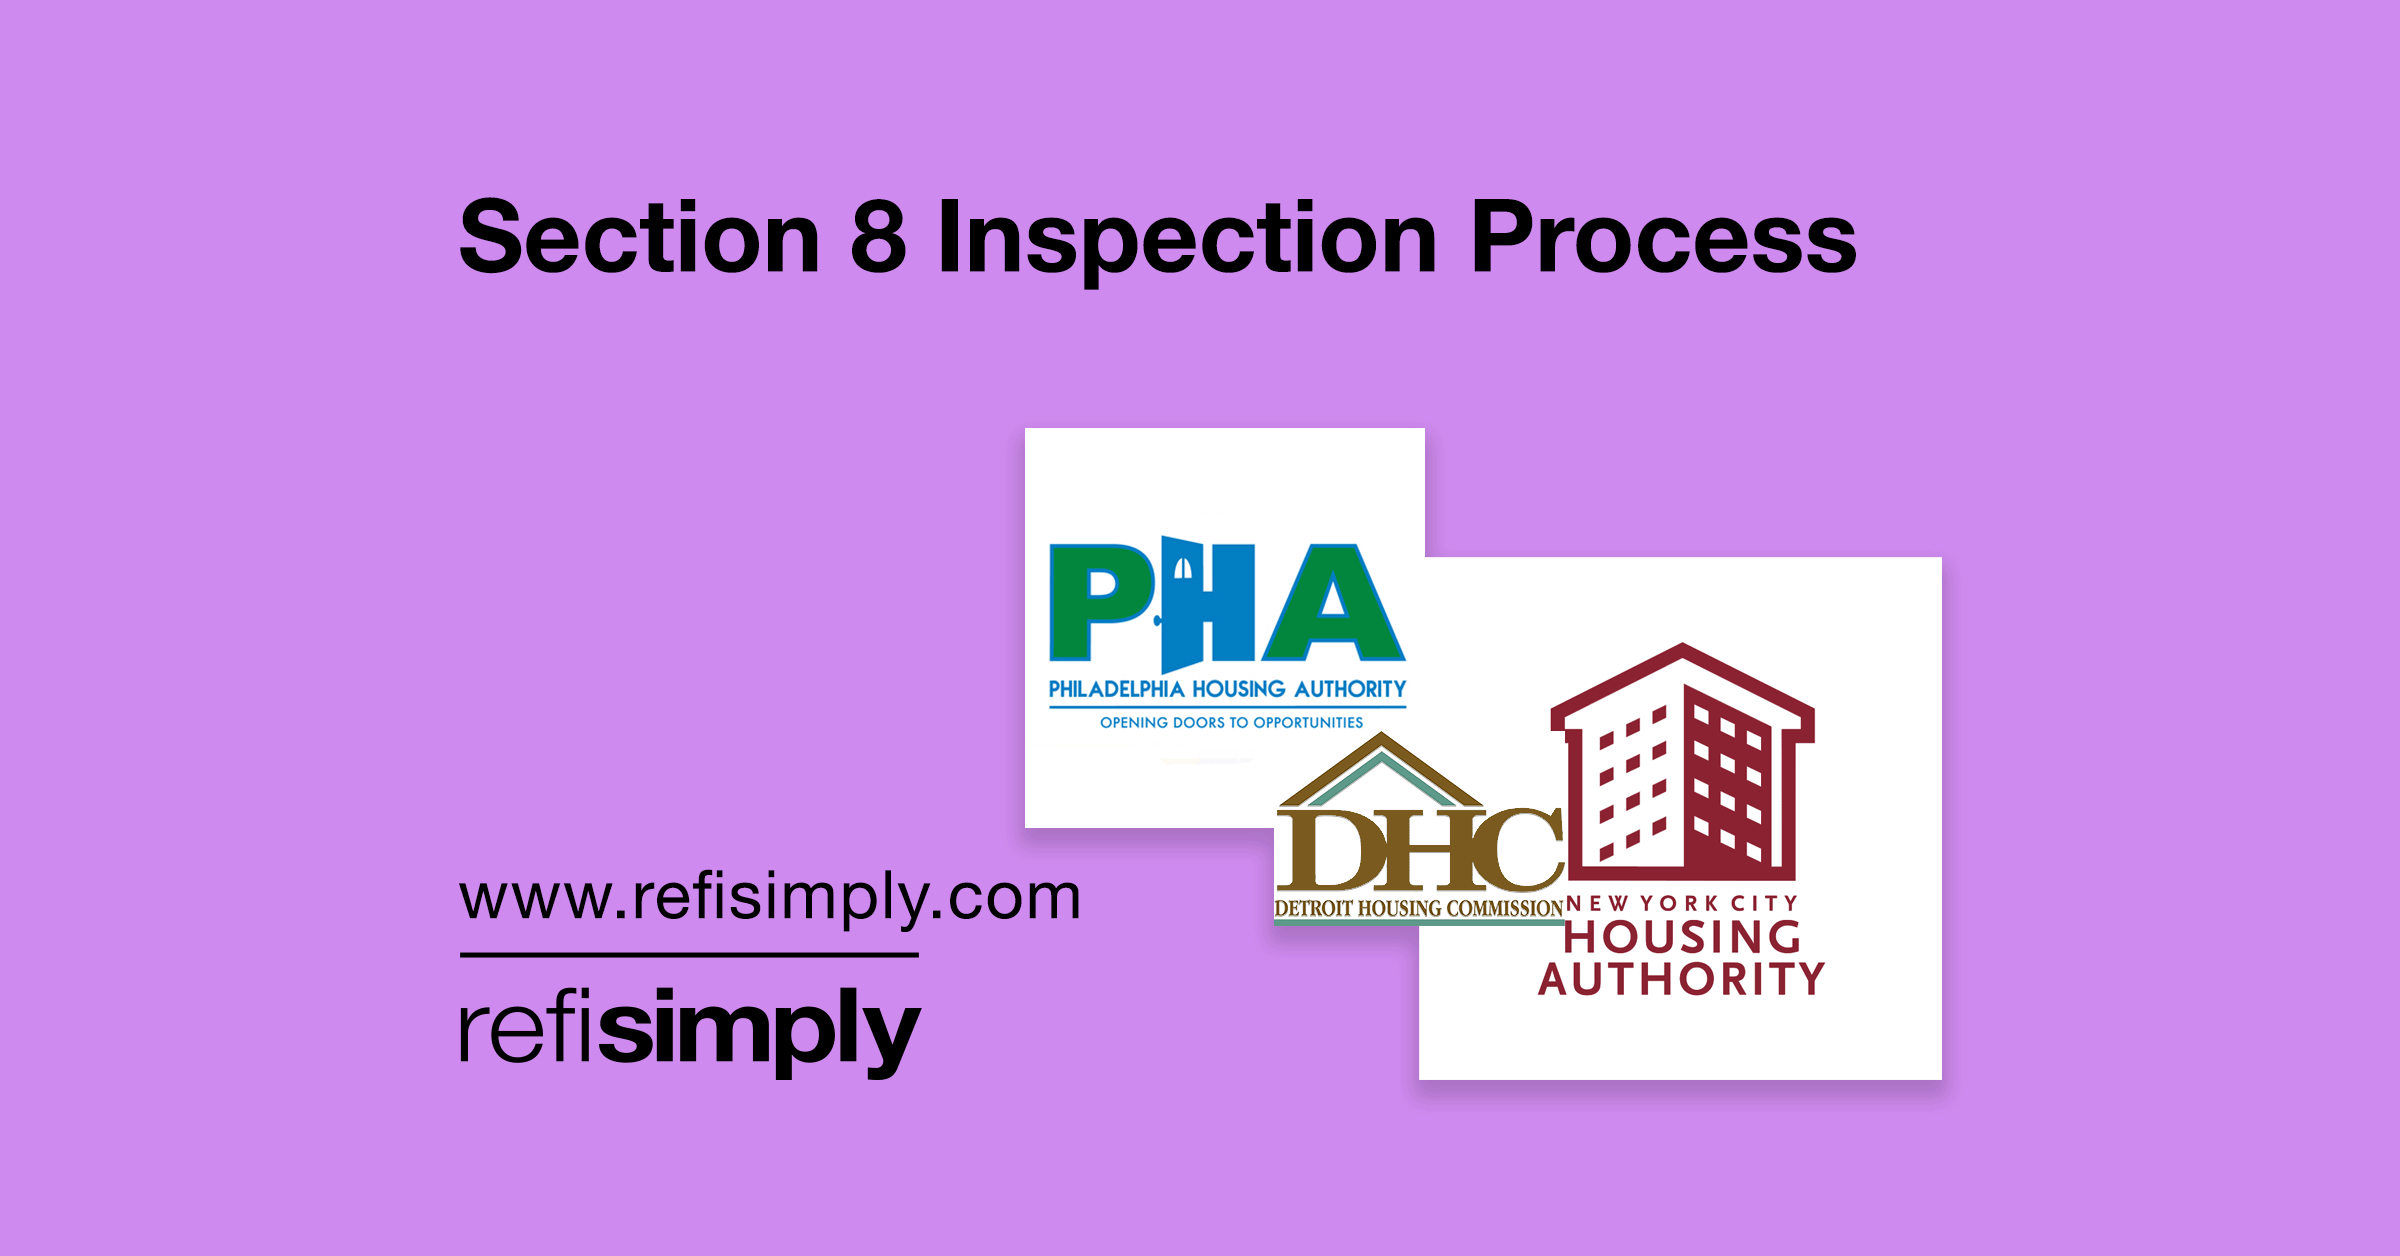 Section 8 Inspection Process